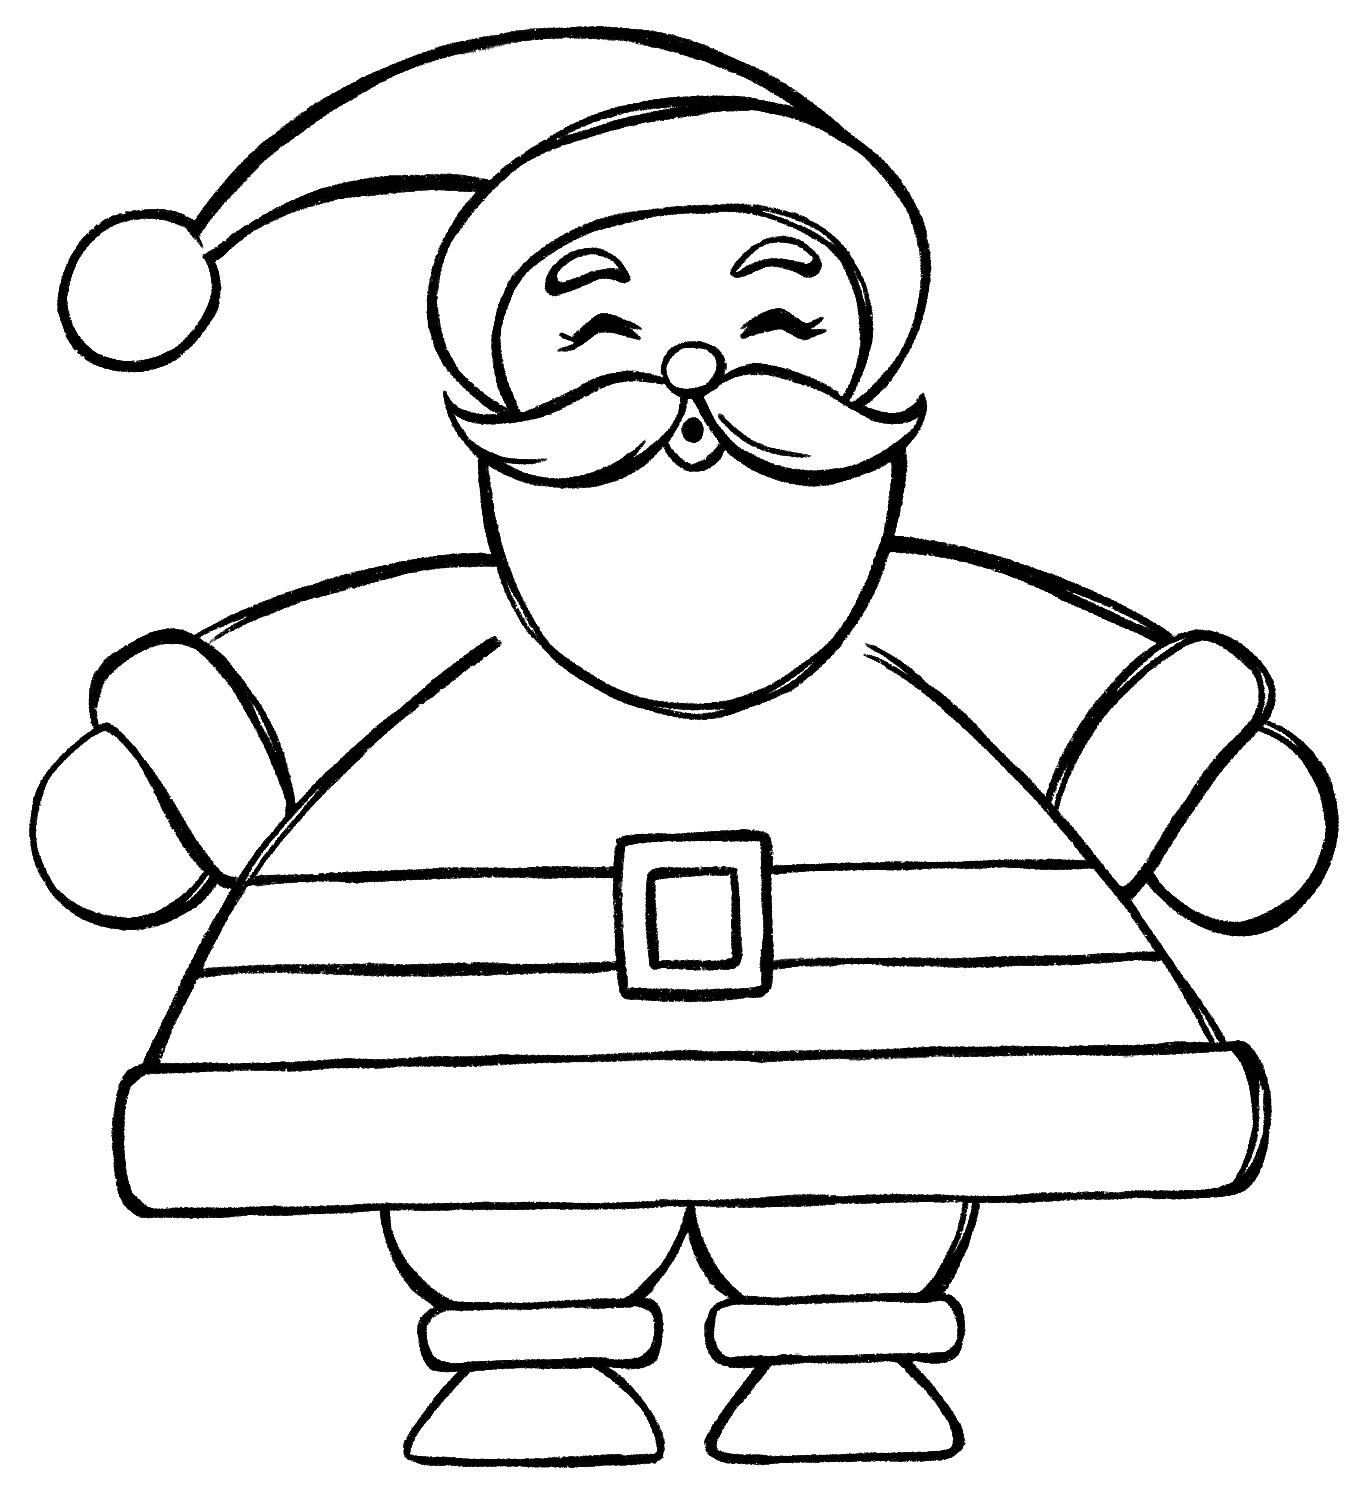 How to Draw Santa Claus | Easy Santa Claus Drawing - YouTube